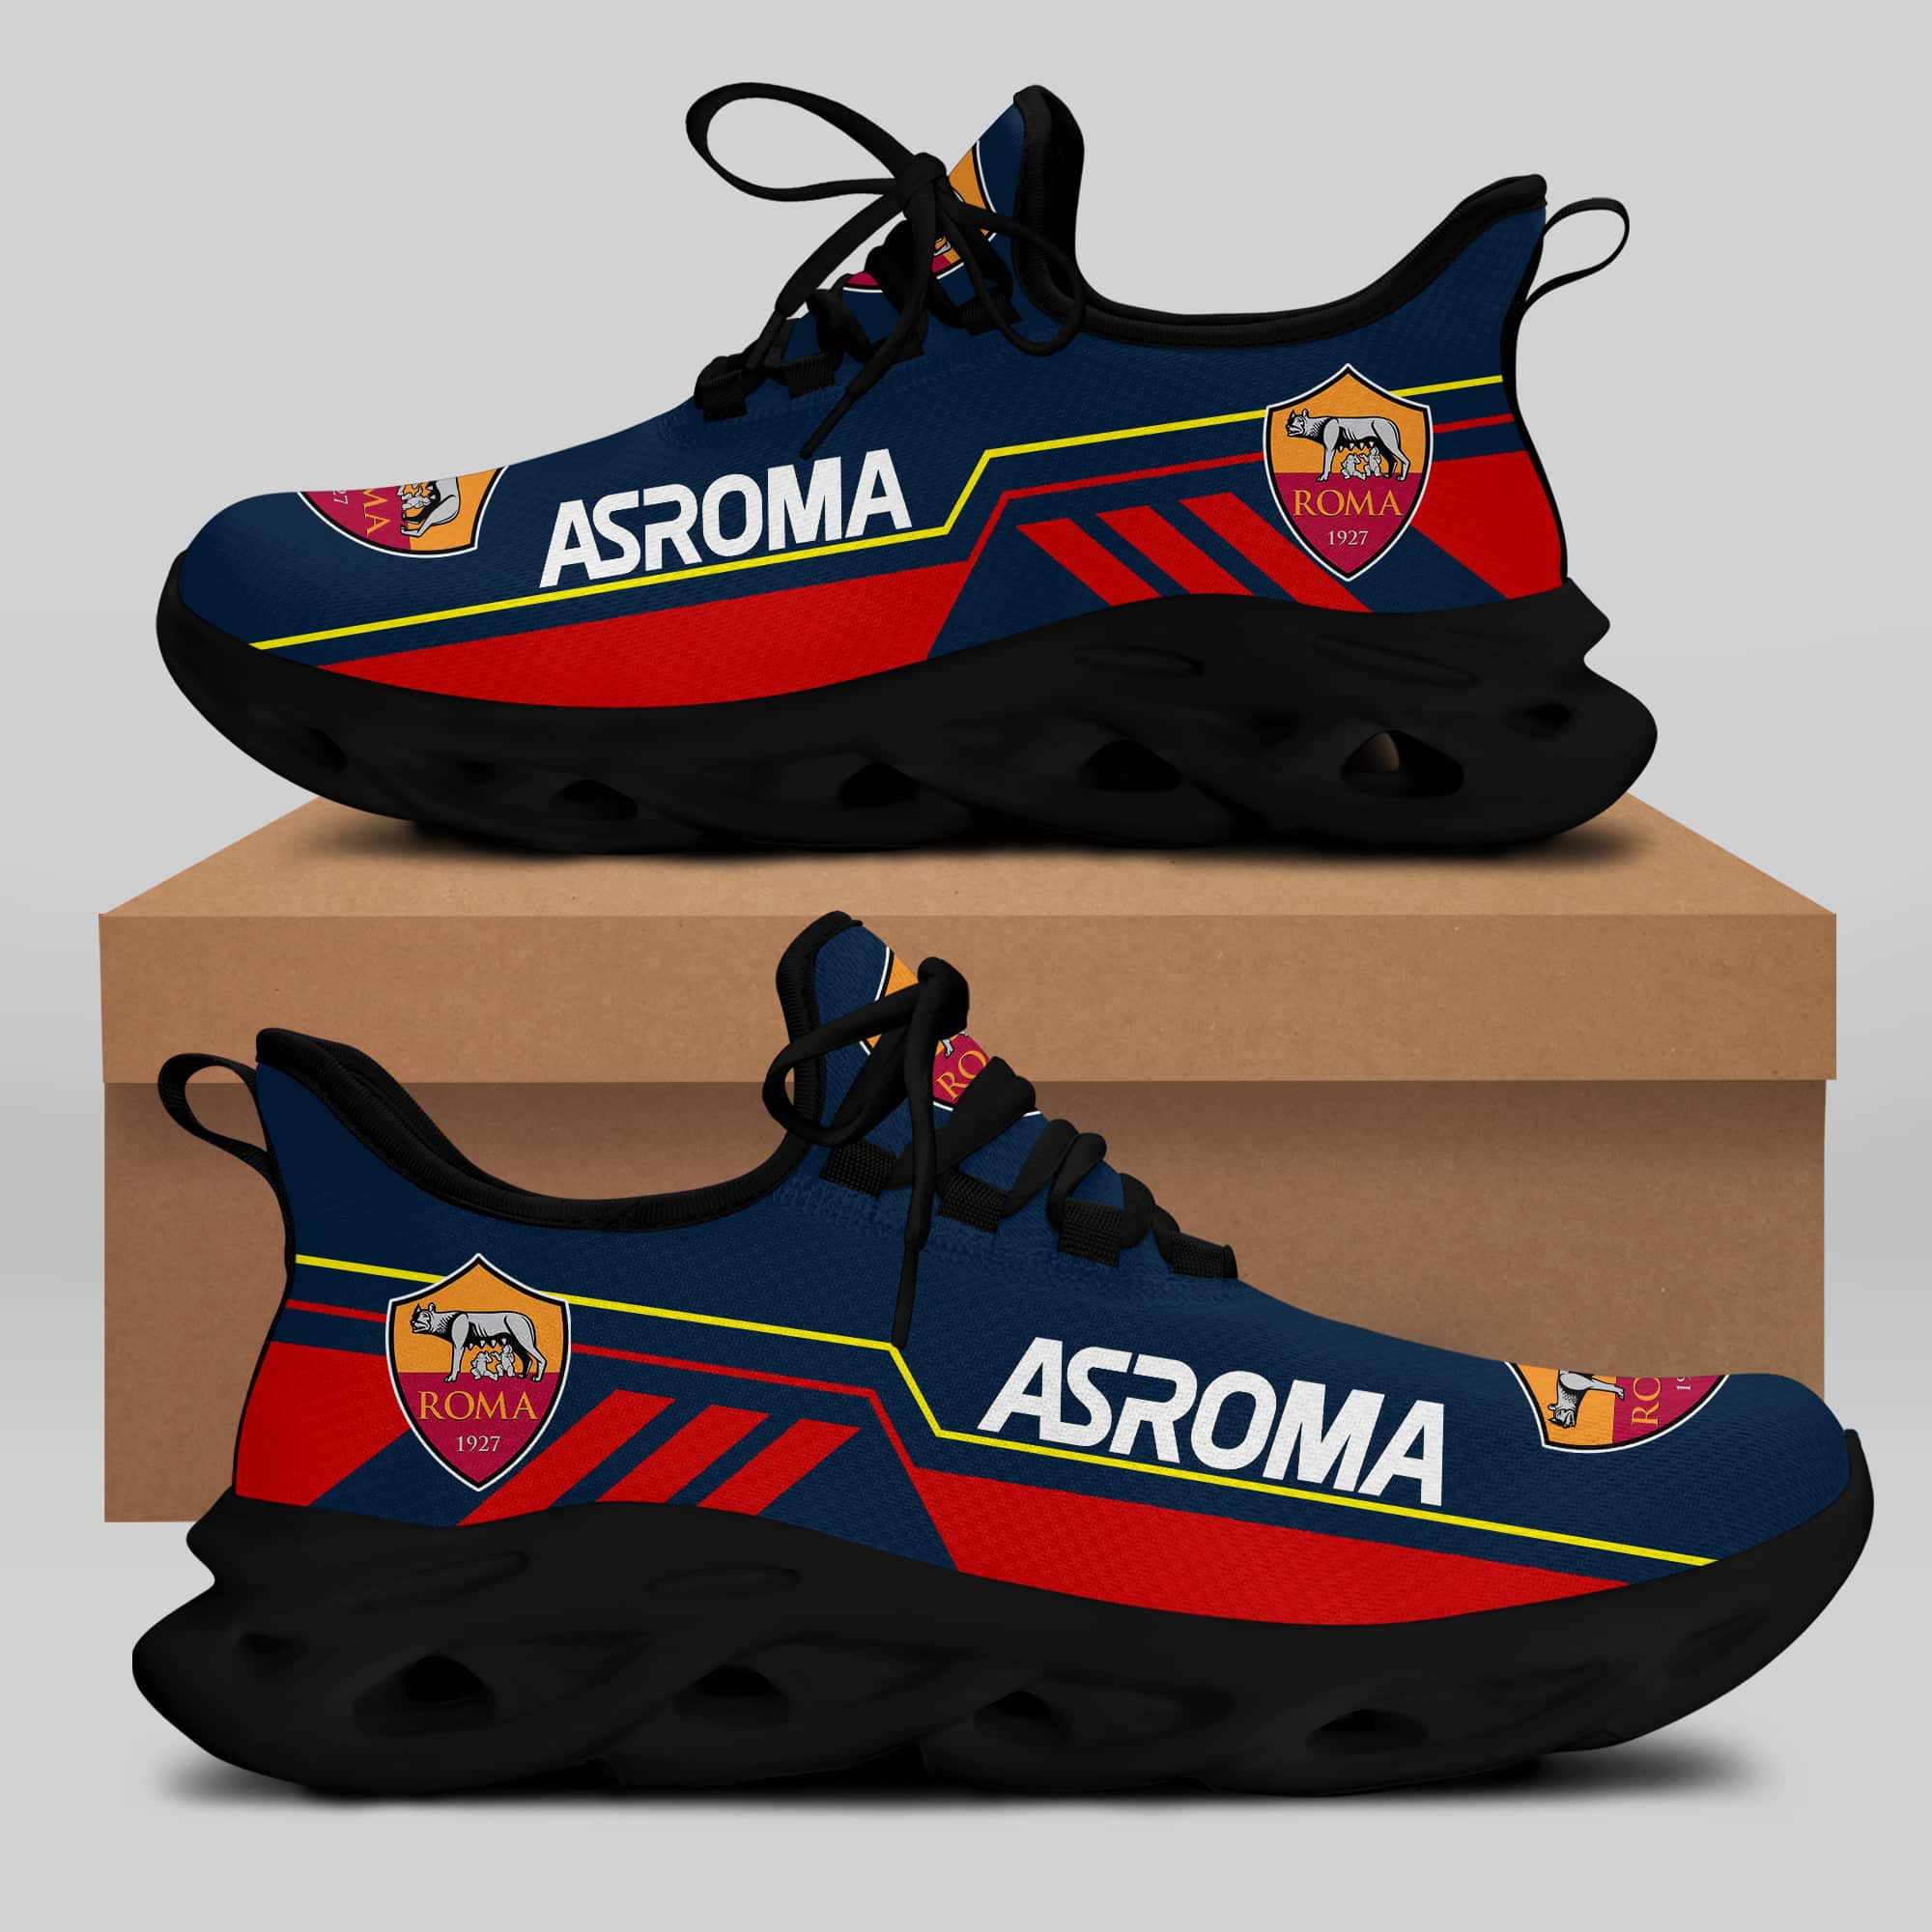 As Roma Running Shoes Max Soul Shoes Sneakers Ver 10 1